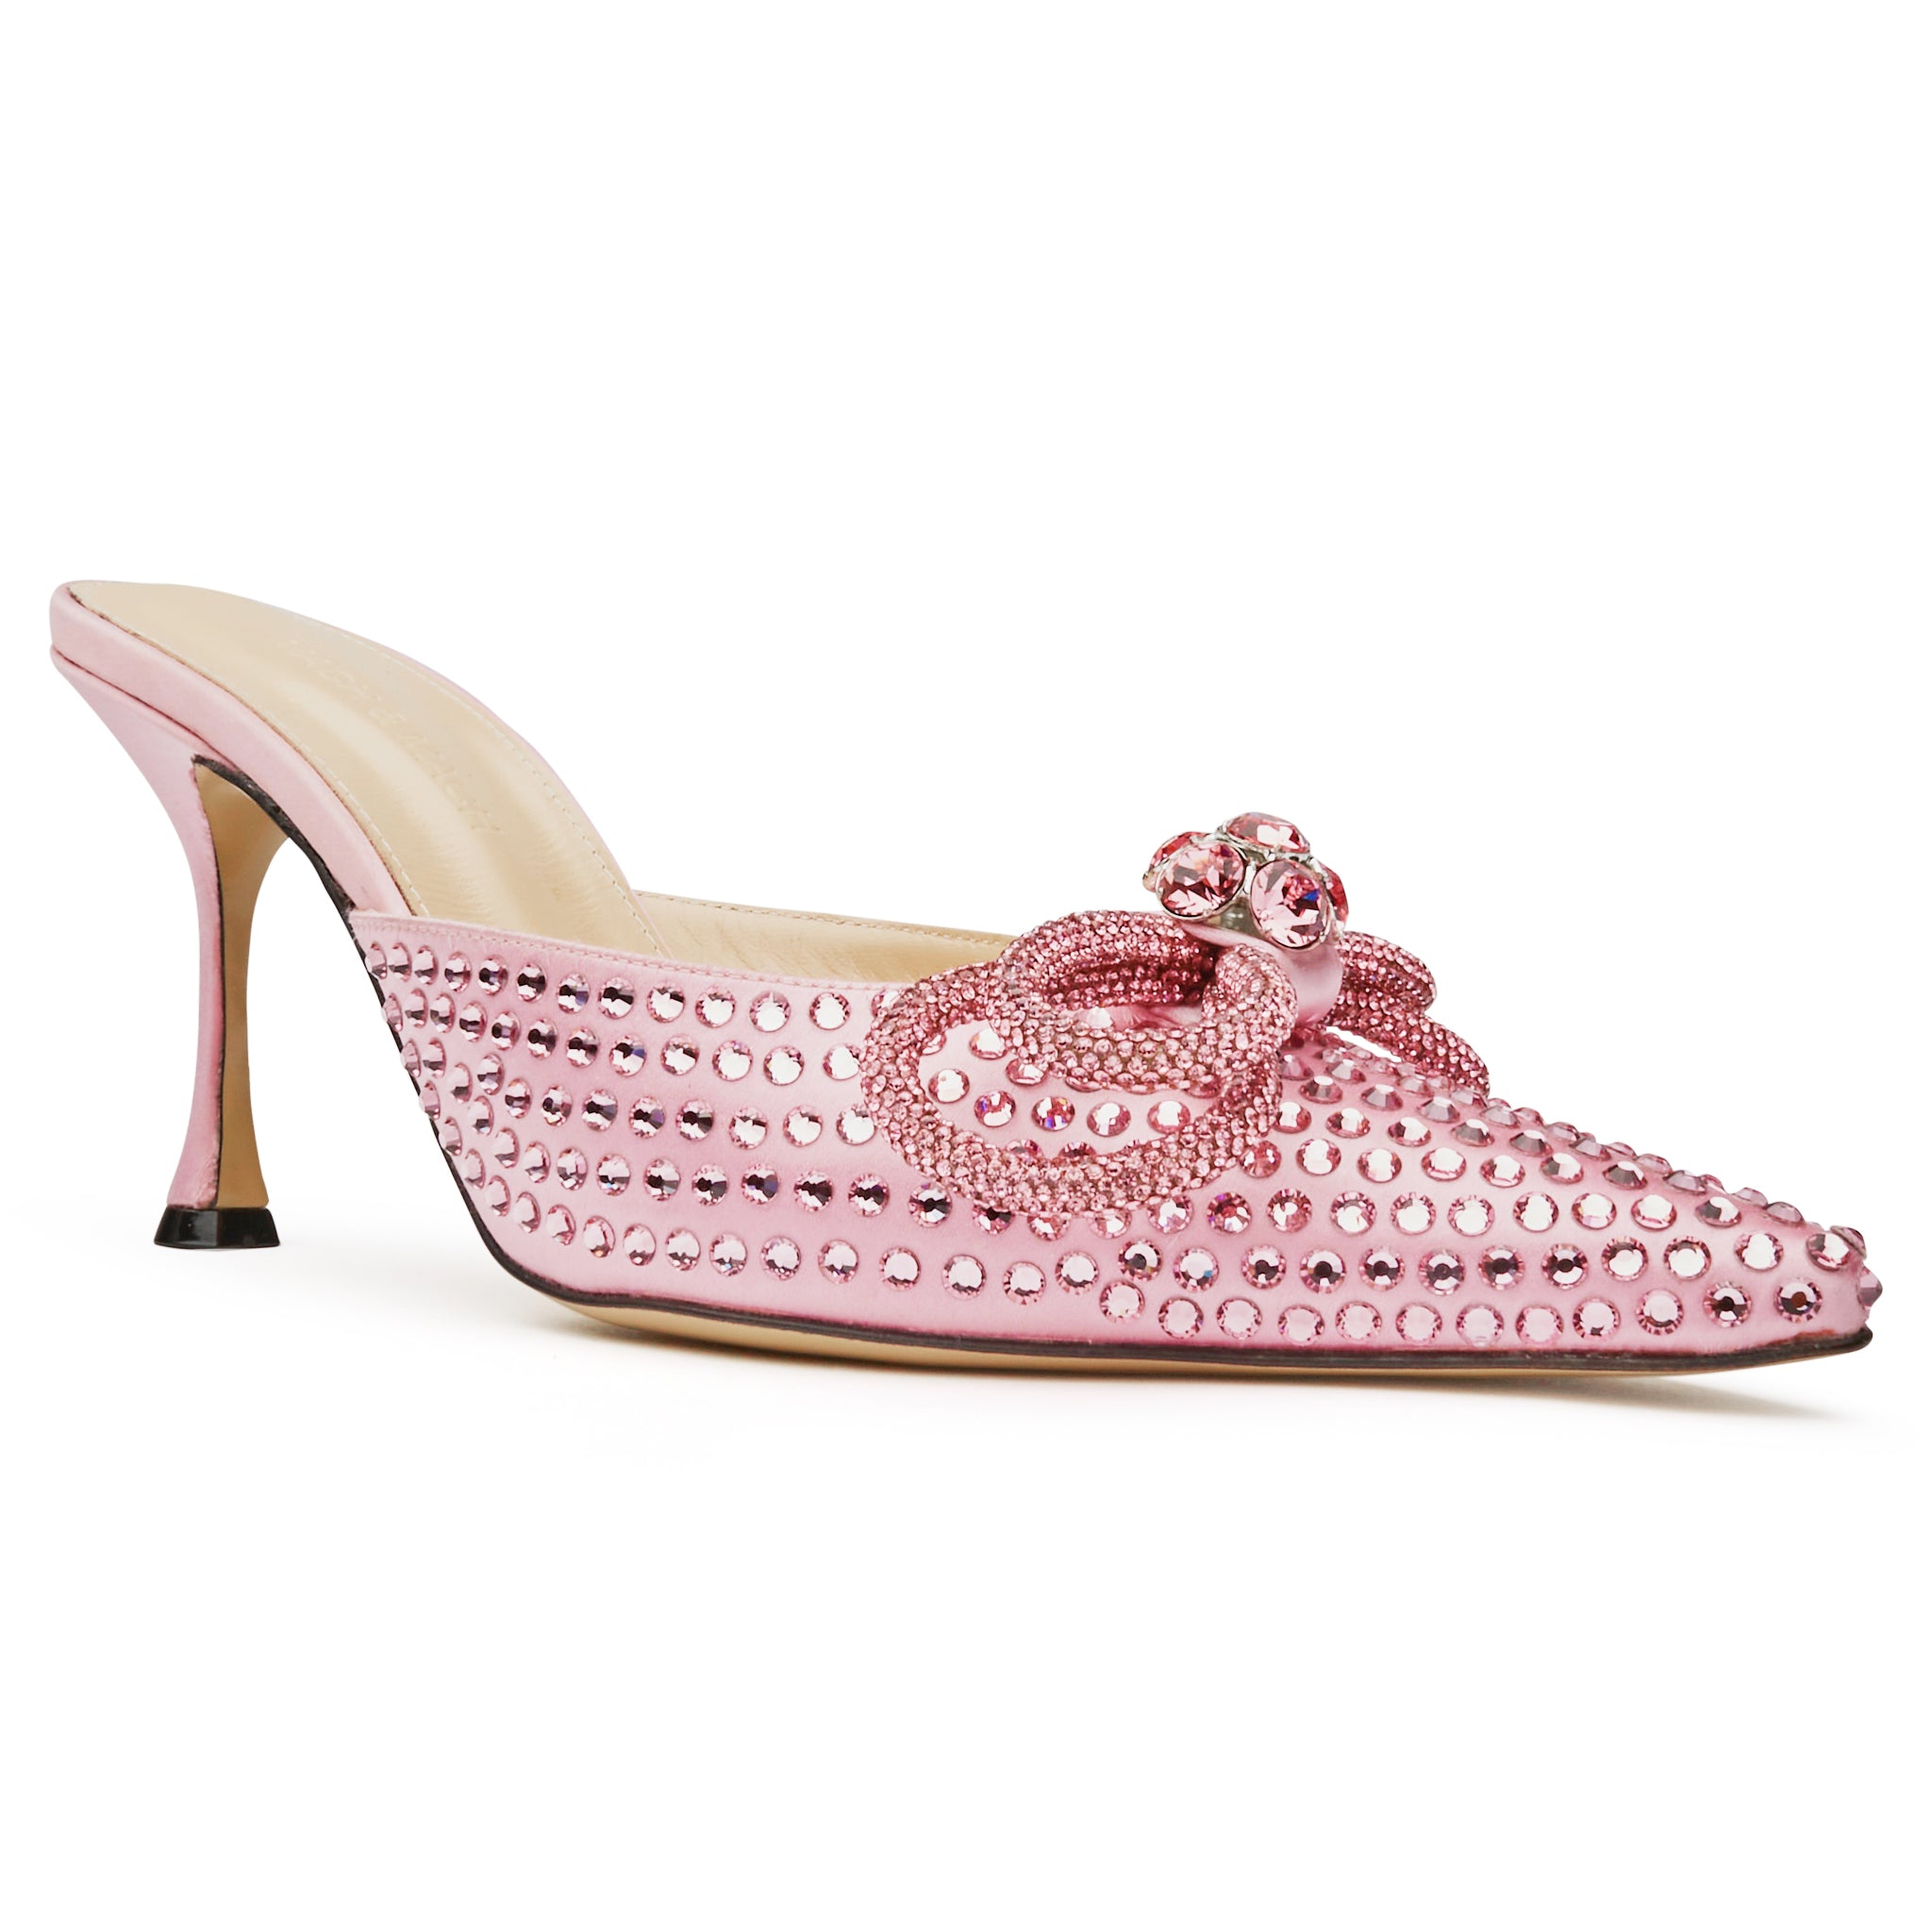 Mach & Mach Double Bow Satin Pink Crystal Embellished 85MM Heels